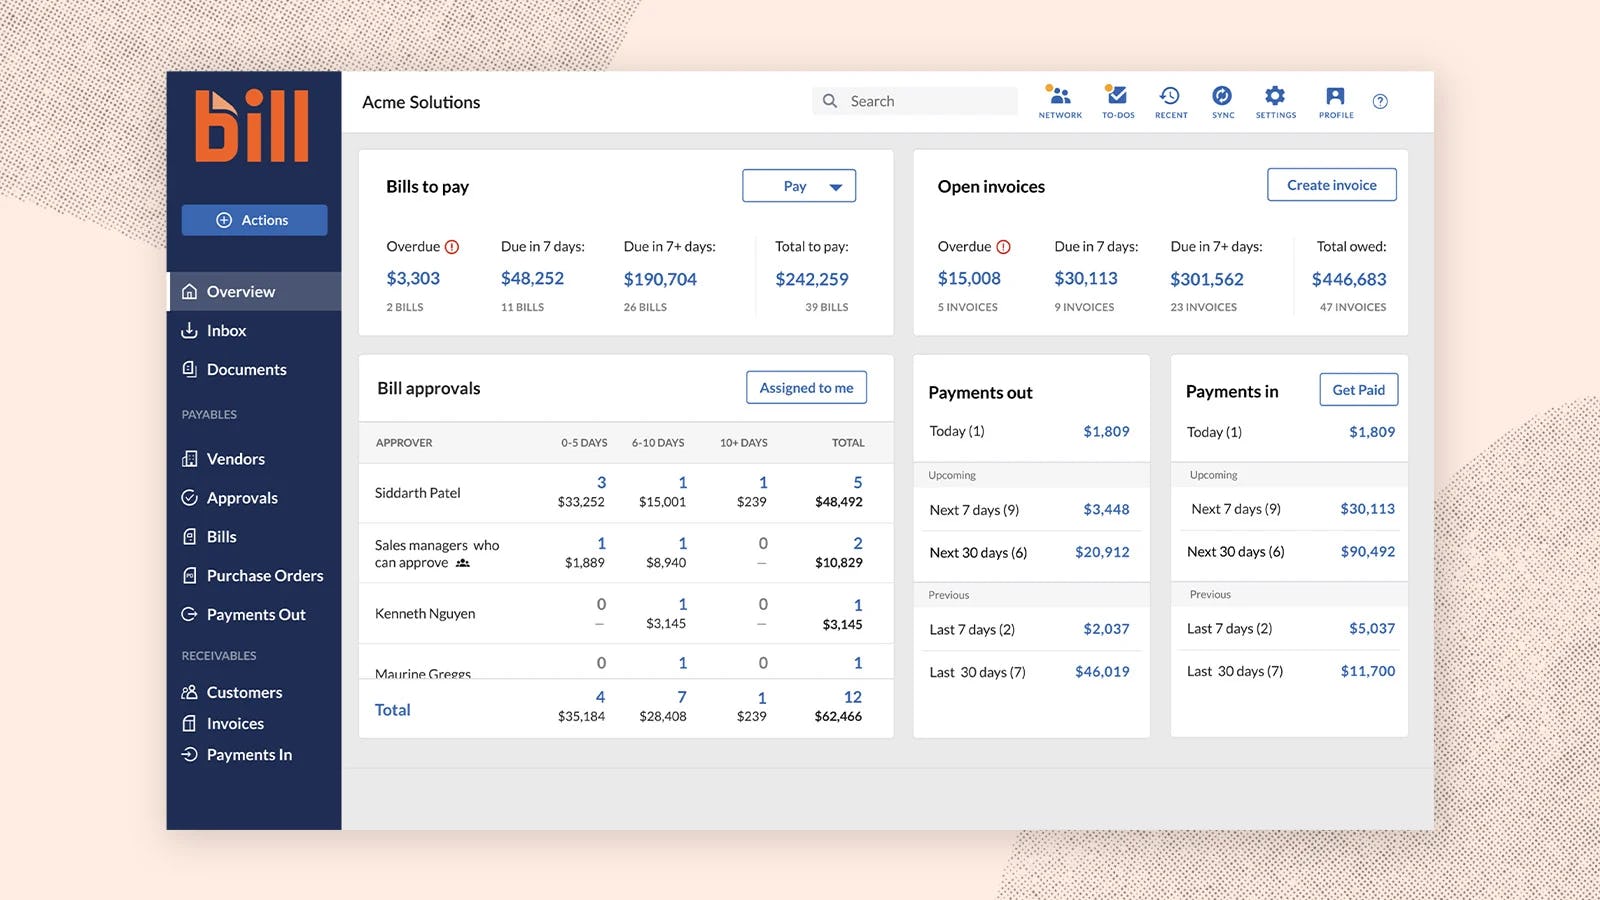 BILL Software - BILL's central dashboard makes it easy to see your upcoming bills, invoices, and ingoing and outgoing payments.